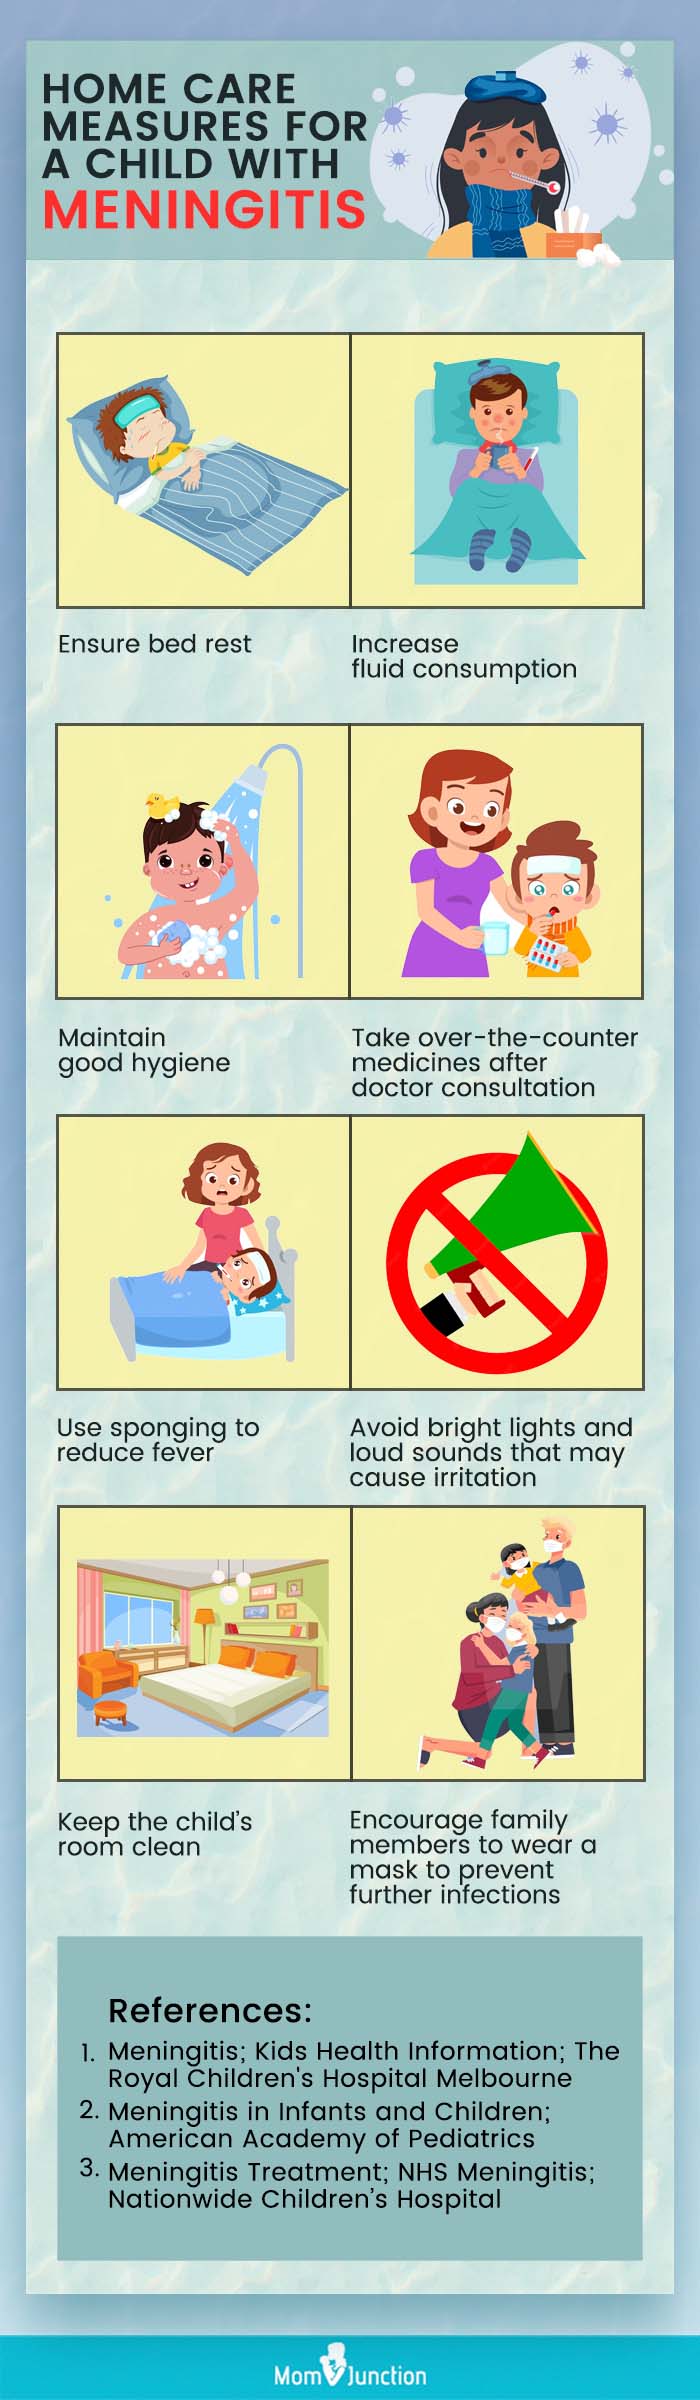 home care measures for a child with meningitis [infographic]